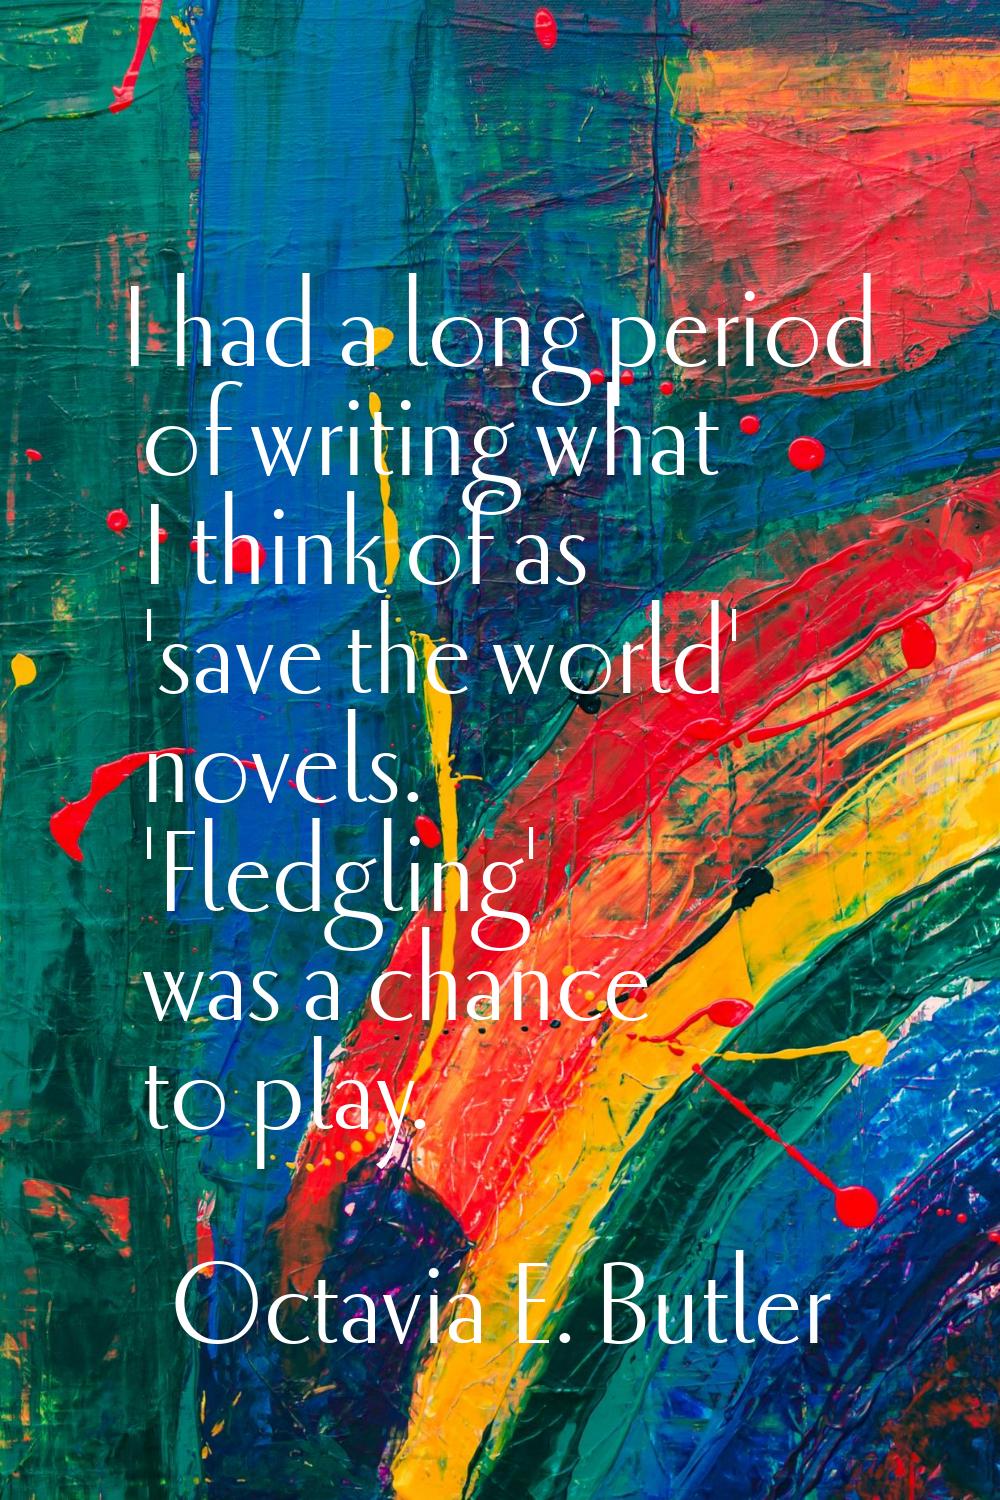 I had a long period of writing what I think of as 'save the world' novels. 'Fledgling' was a chance